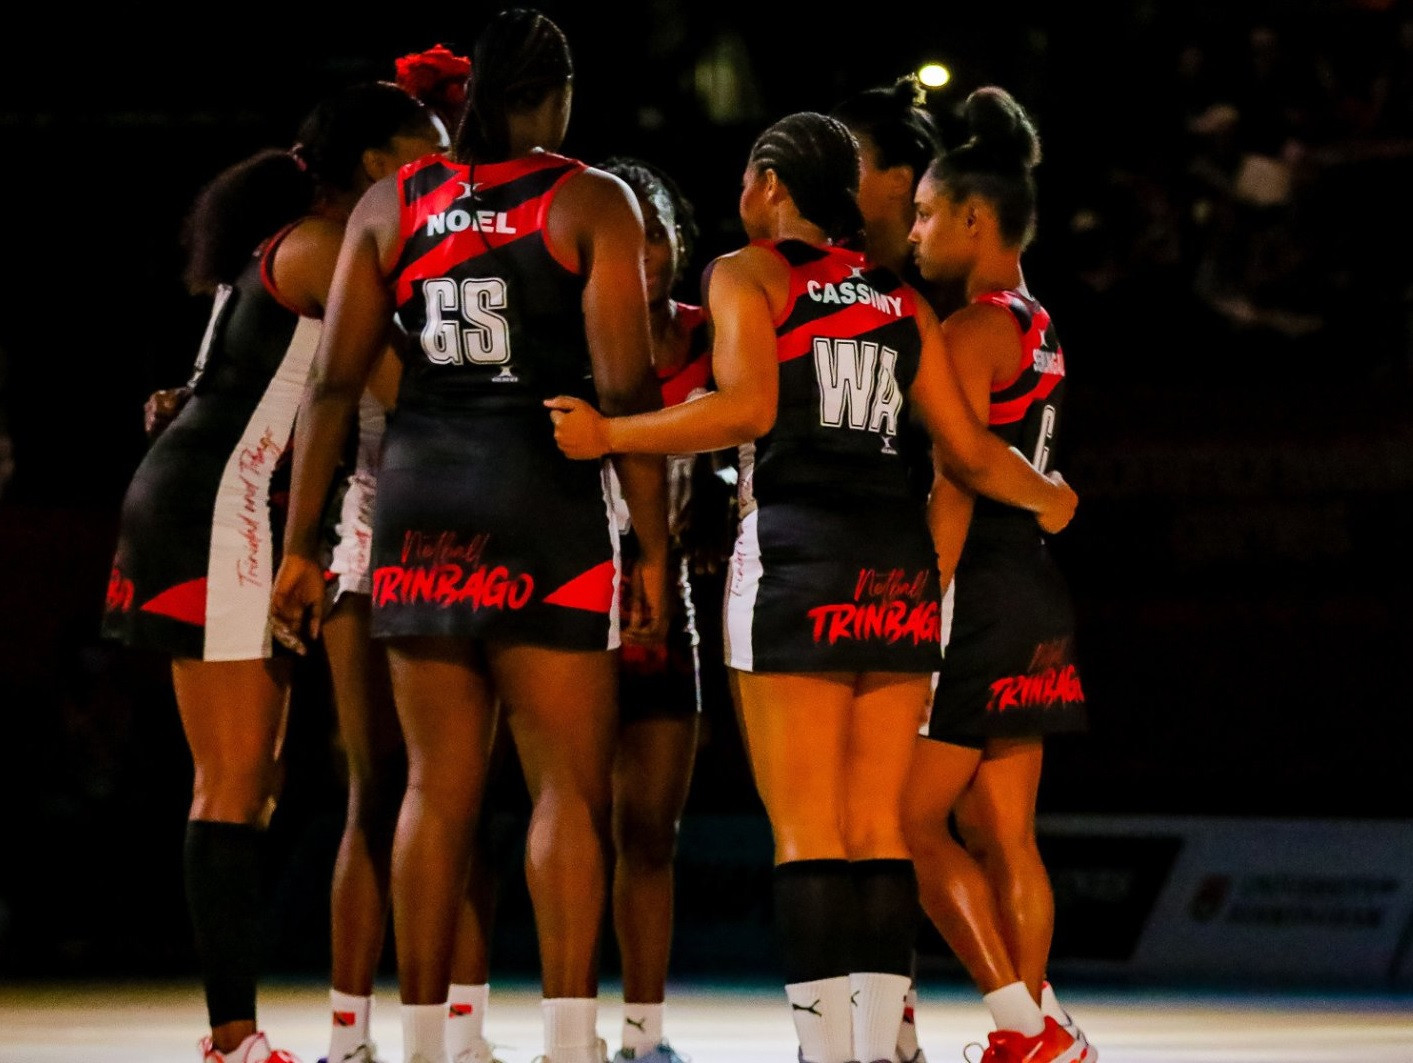 Fast5 netball, rugby sevens and beach volleyball line-ups set for Trinbago 2023